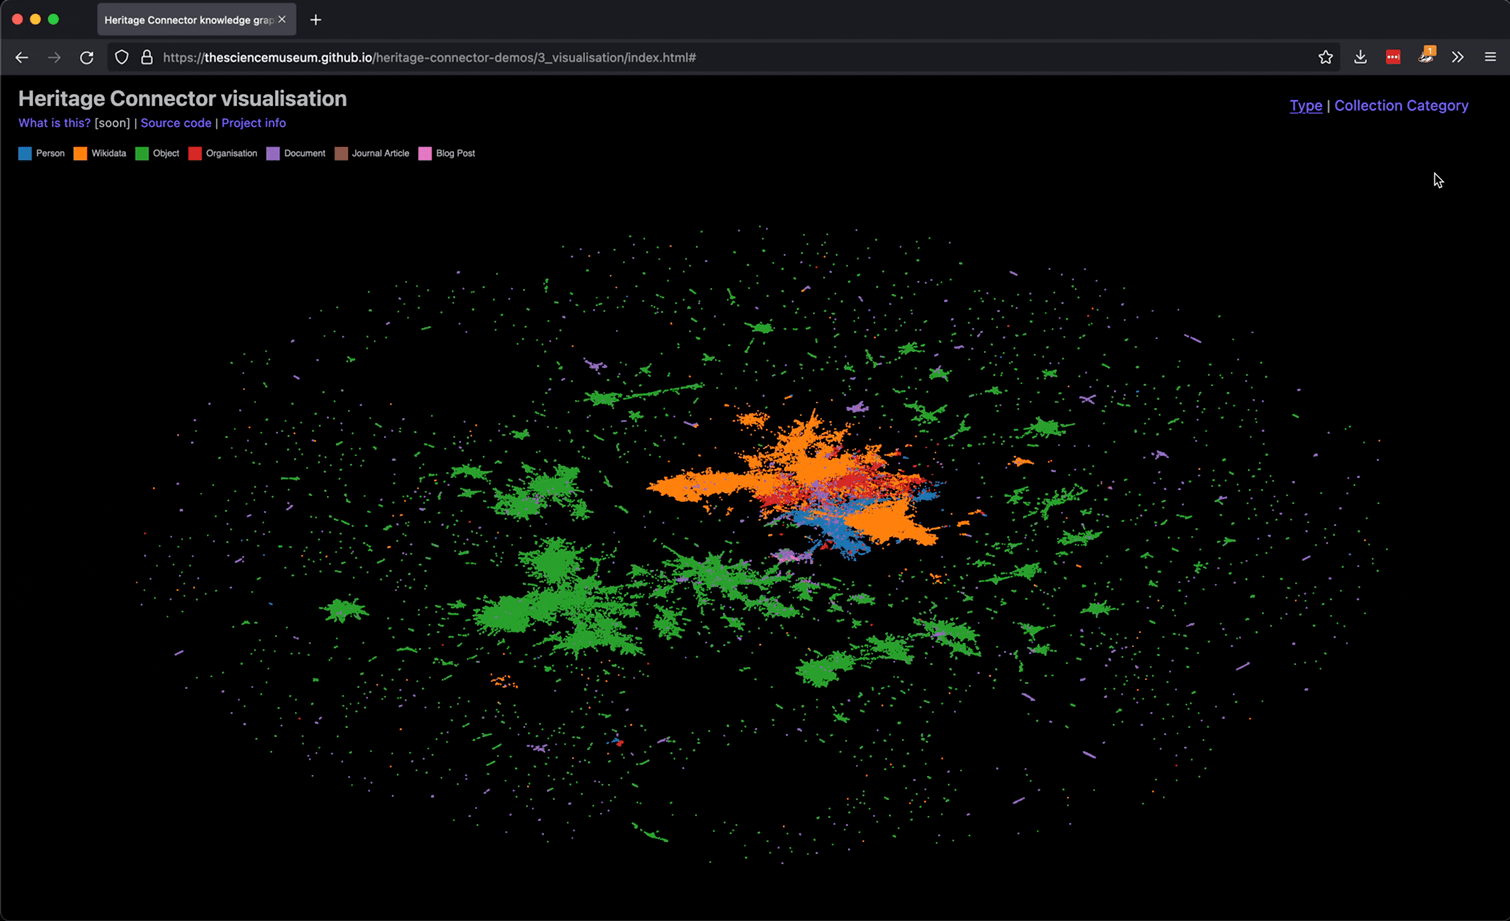 Animated screenshot of Heritage Connector visualisation